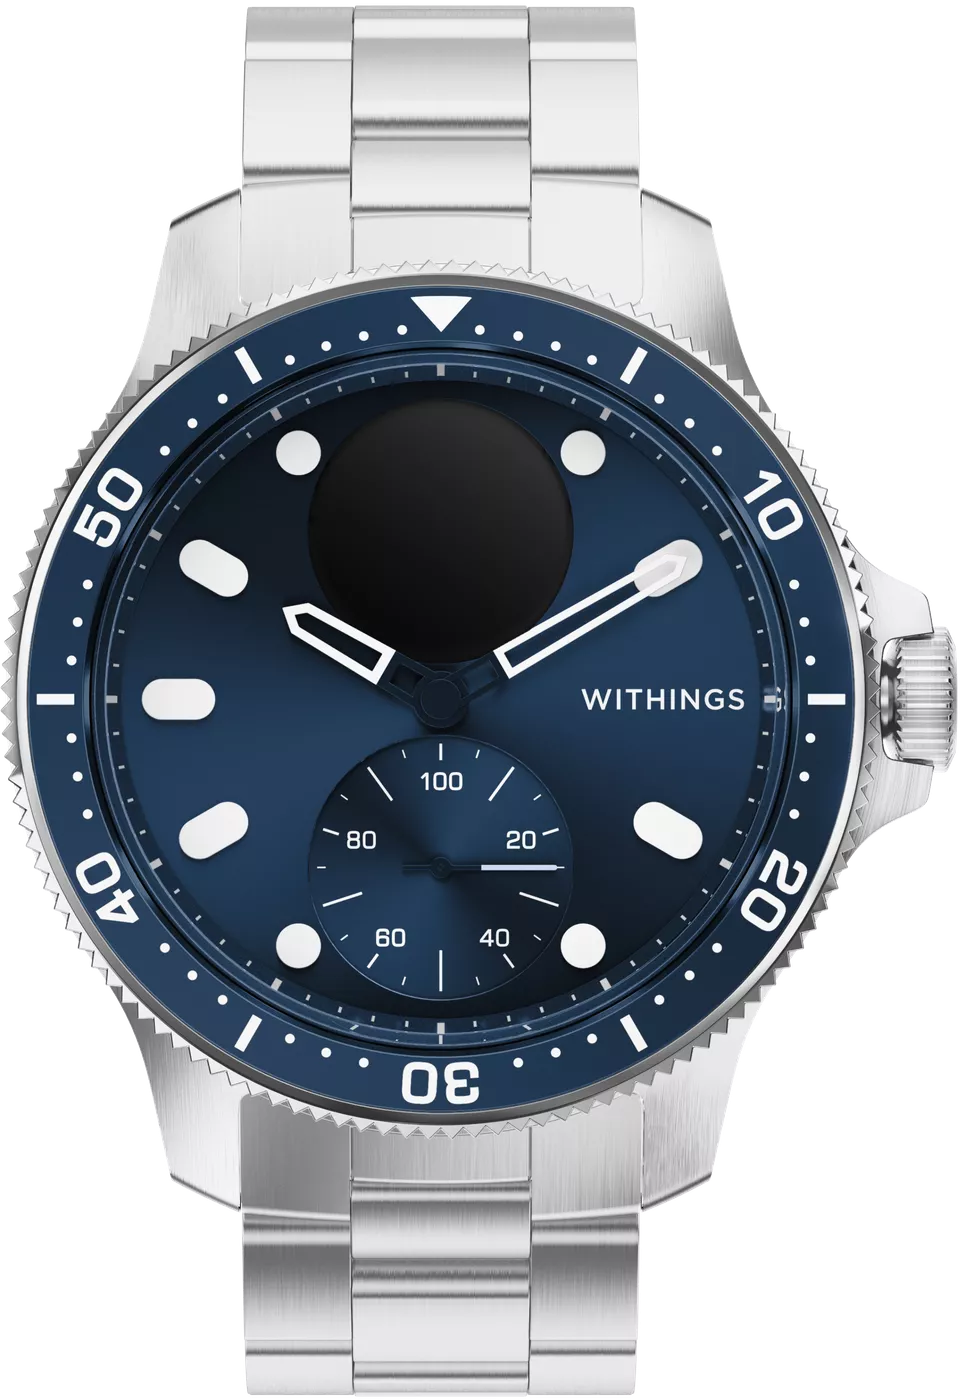 Watch ScanWatch & Withings Strap Band Horizon